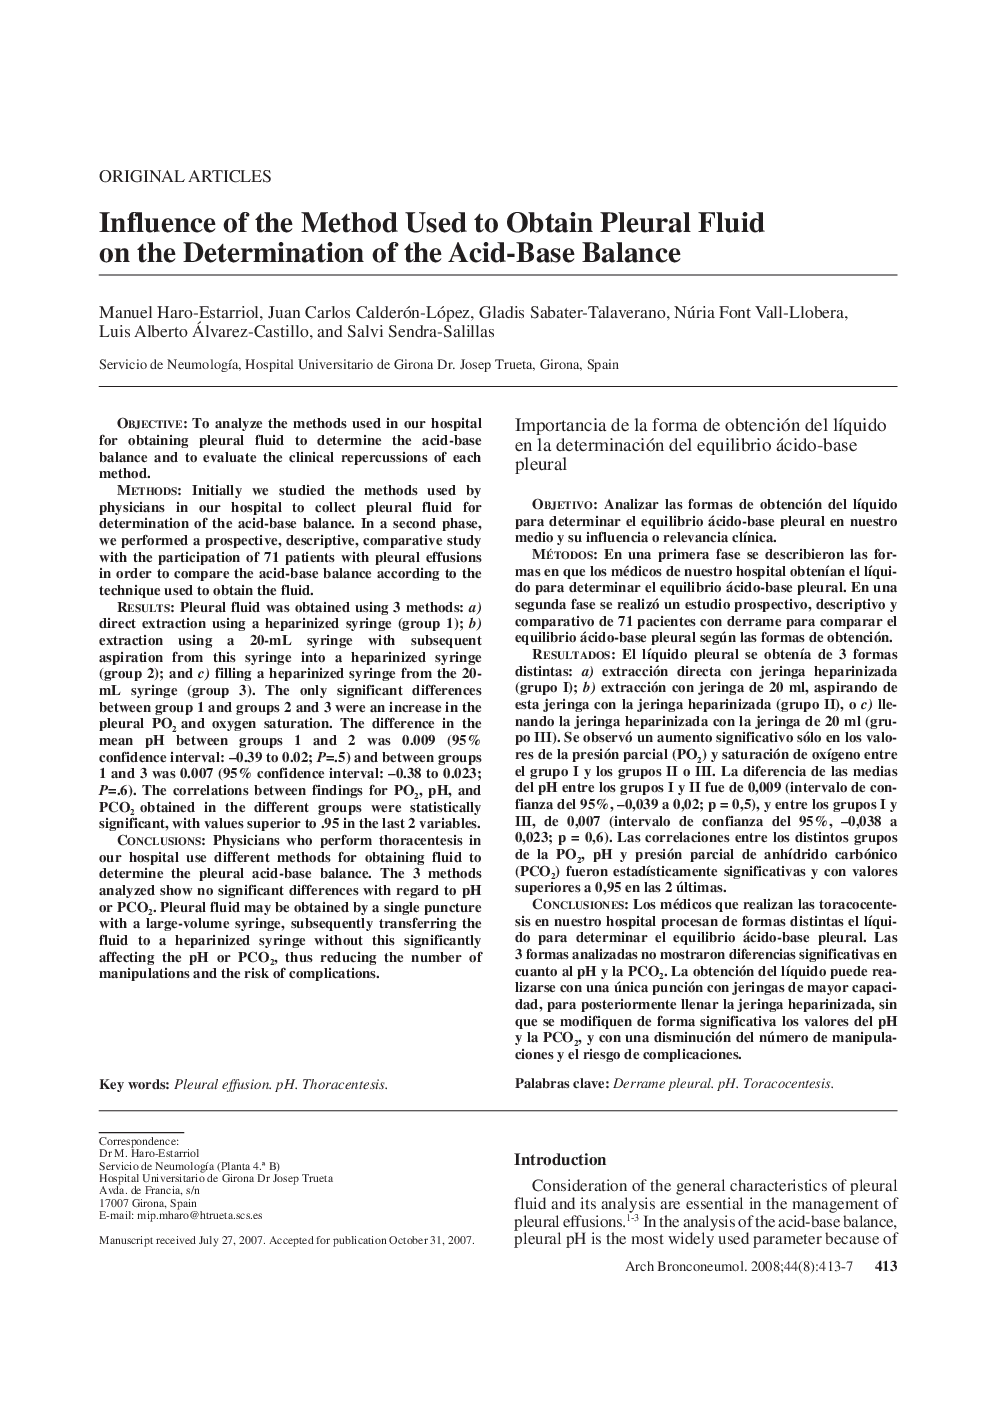 Influence of the Method Used to Obtain Pleural Fluid on the Determination of the Acid-Base Balance